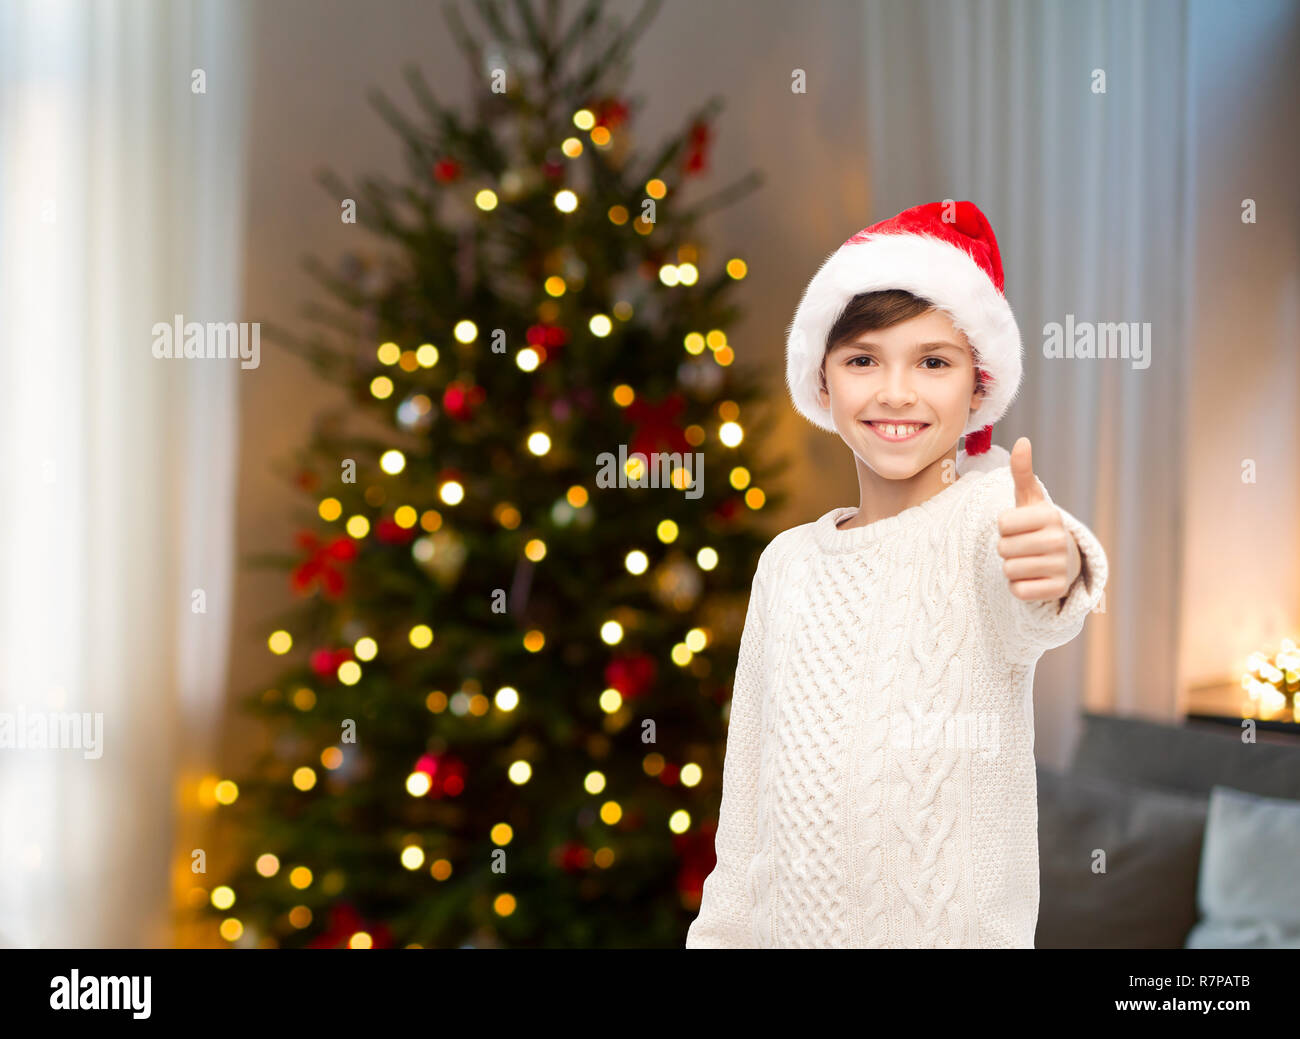 happy boy in santa hat showing thumbs up Stock Photo